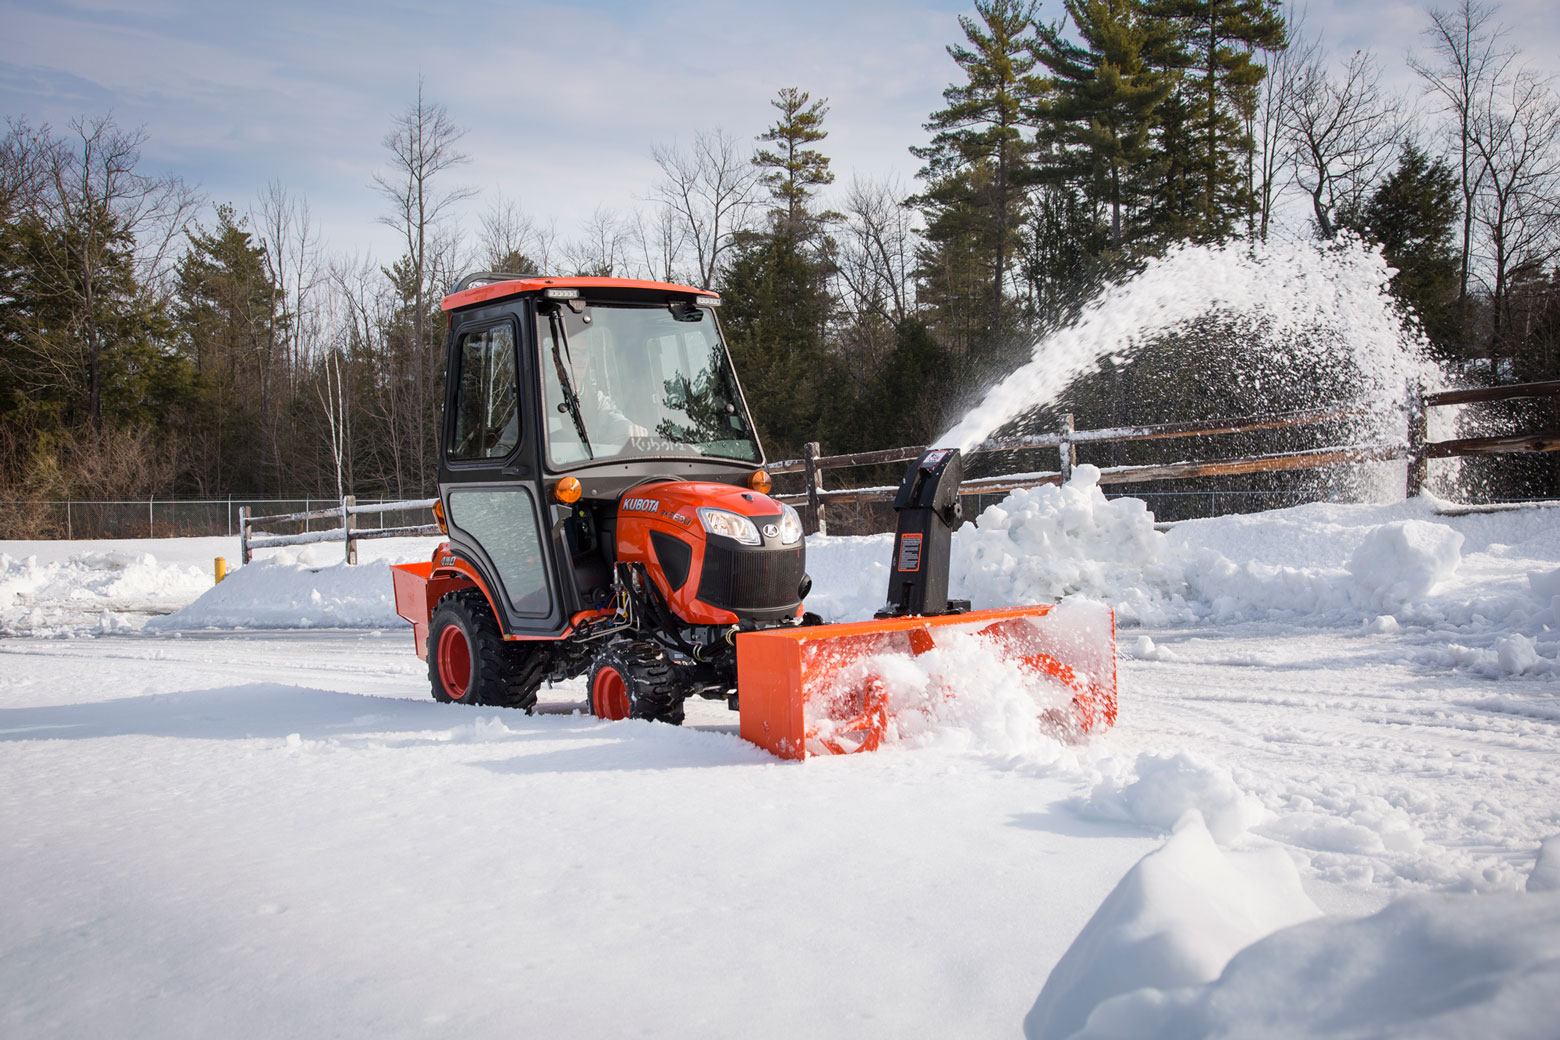 Setting-up and operating the Kubota BX Series Snow Blower Attachment